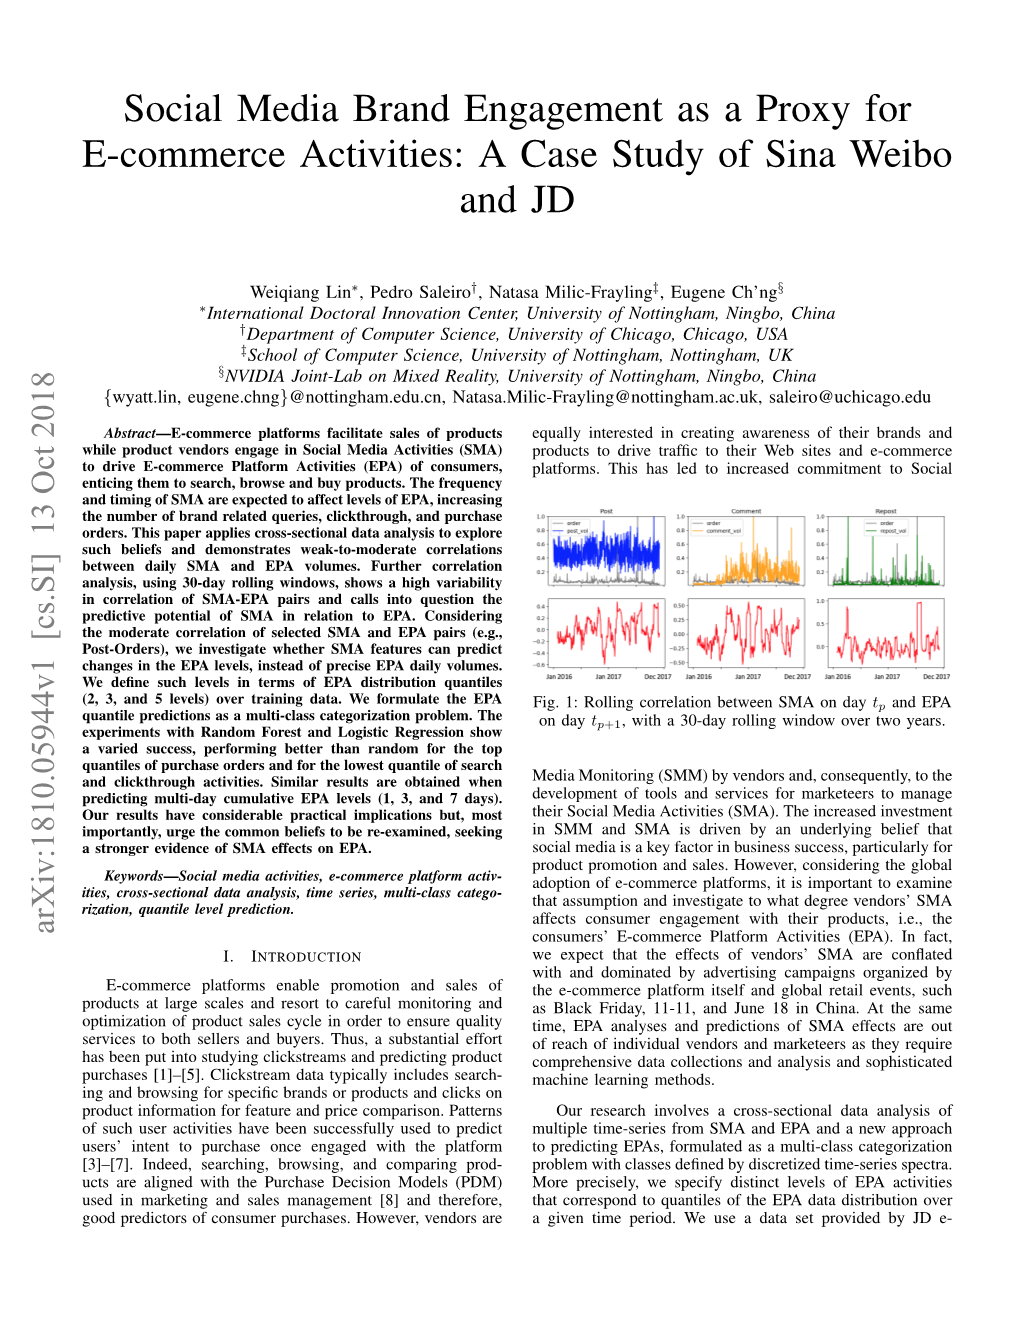 Social Media Brand Engagement As a Proxy for E-Commerce Activities: a Case Study of Sina Weibo and JD